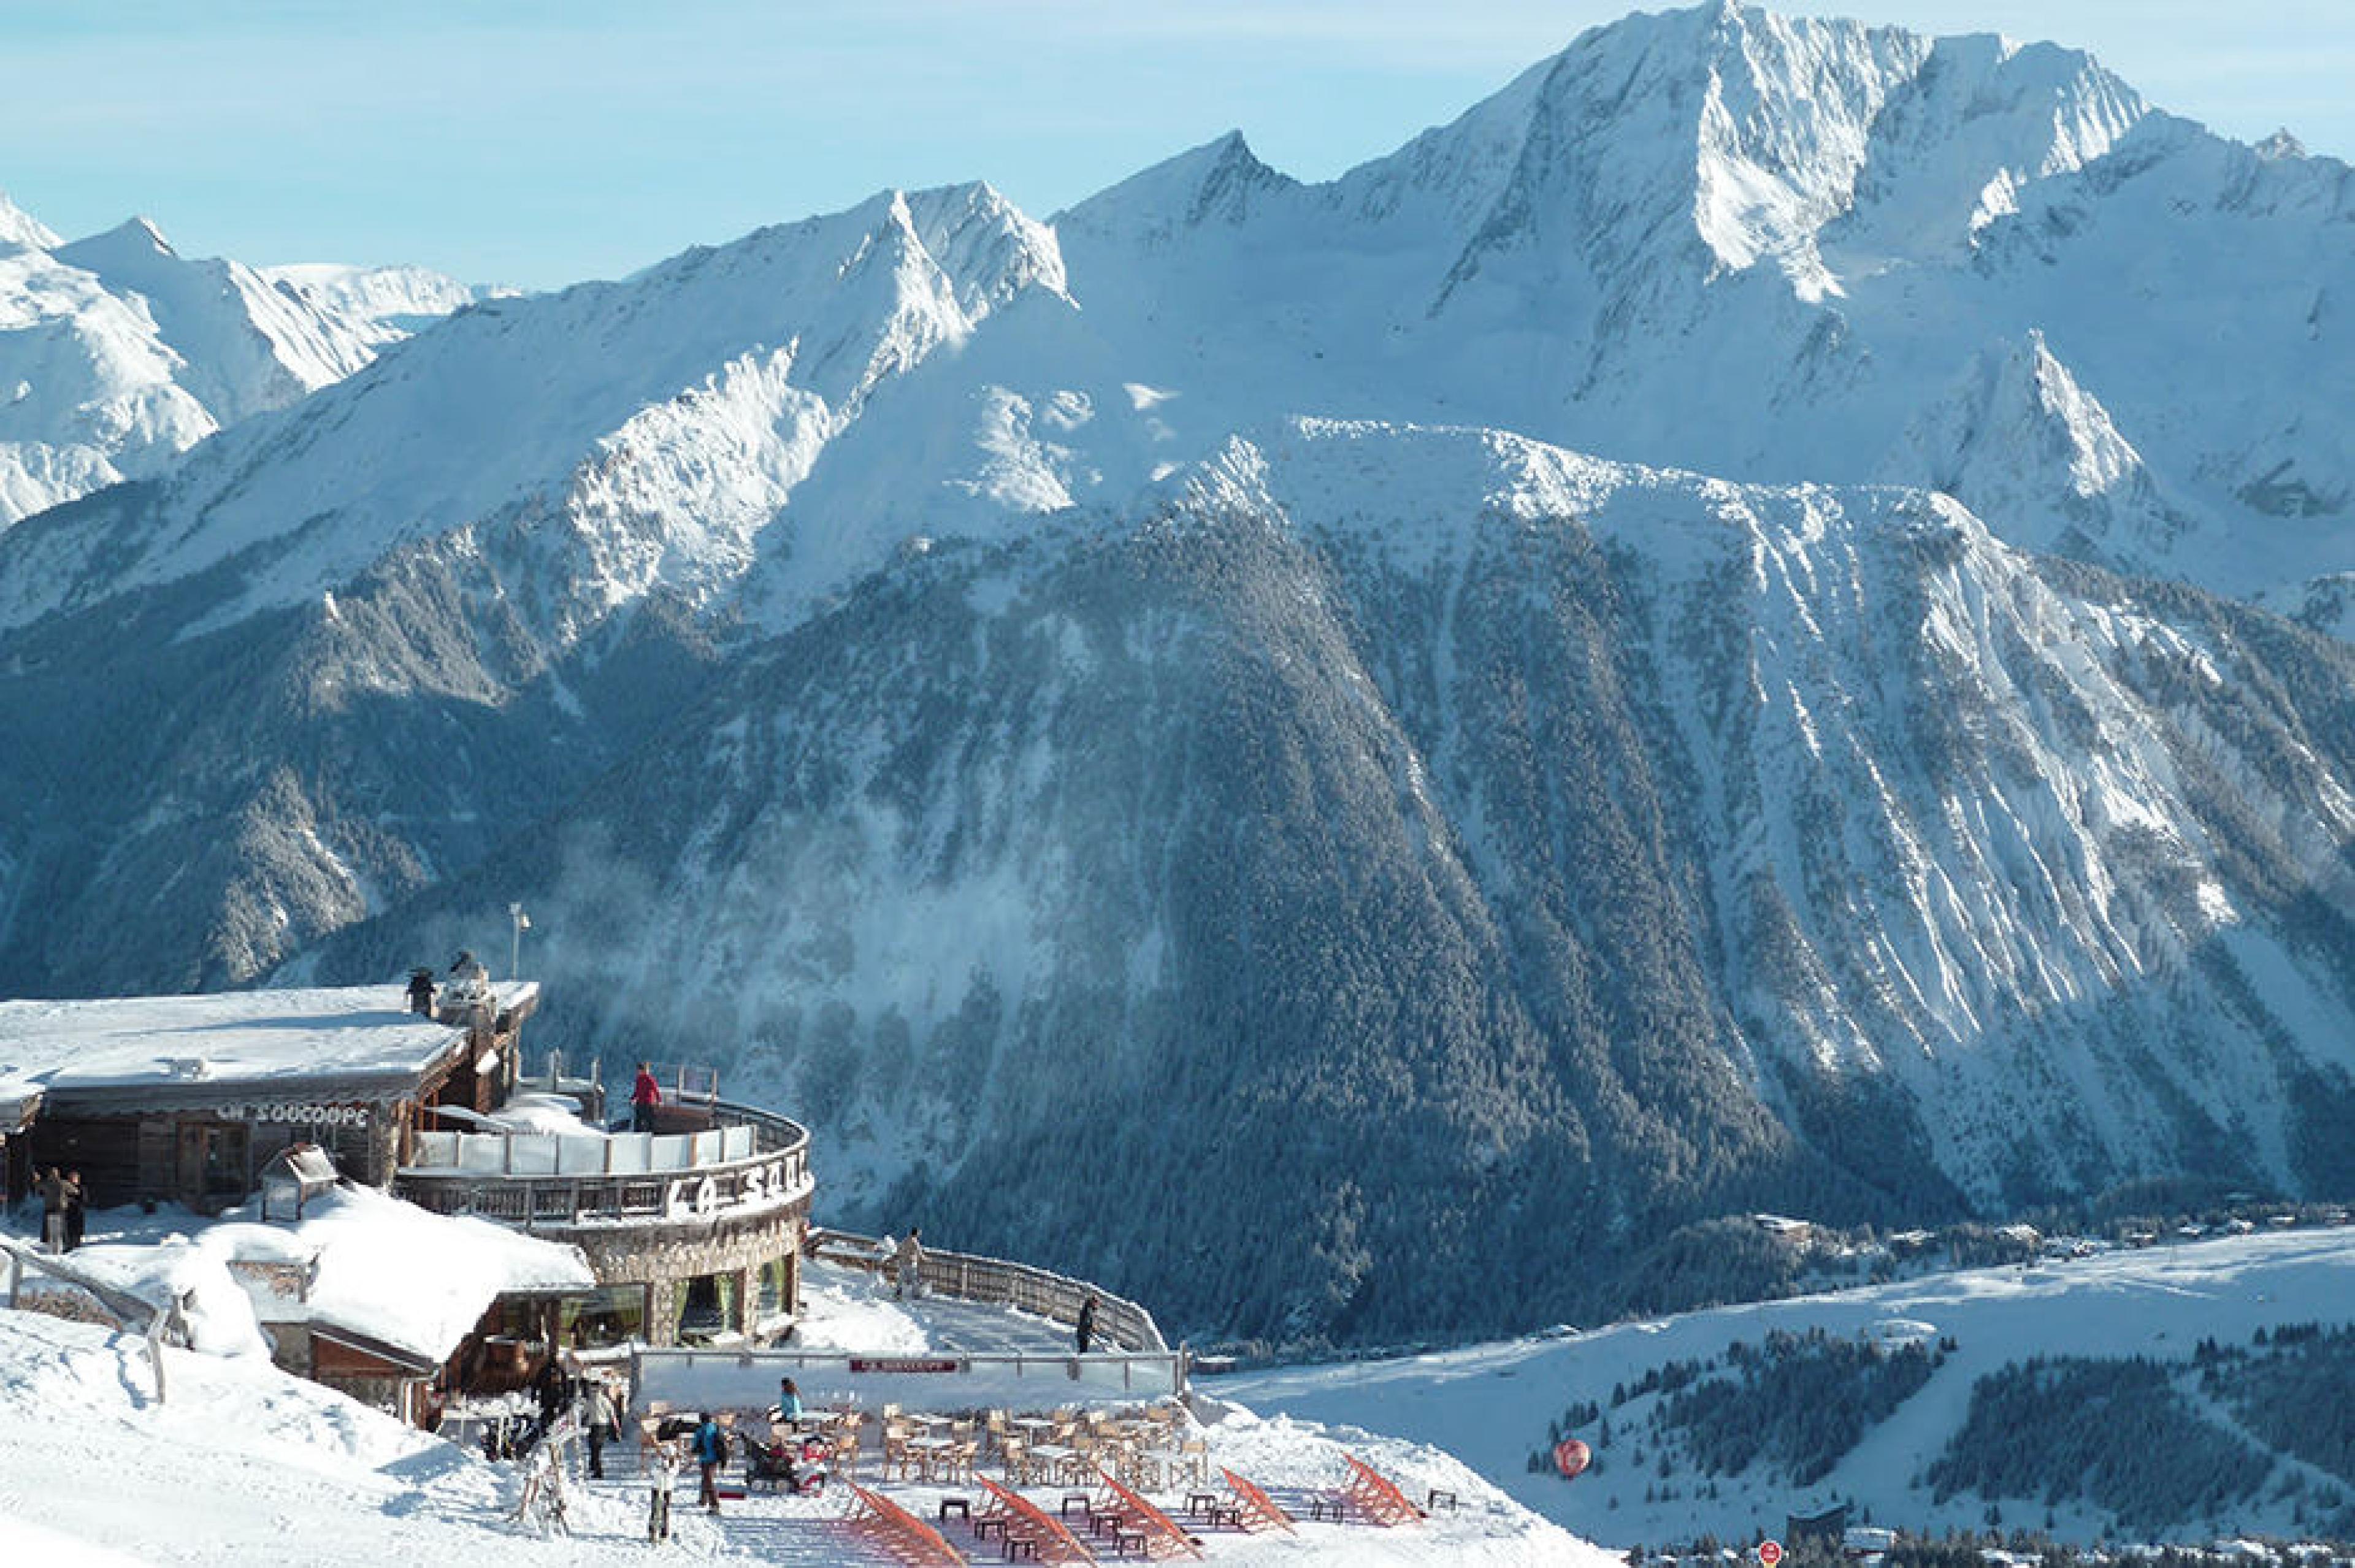 This Chic Ski Destination Is a Favorite Vacation Spot of the Royal